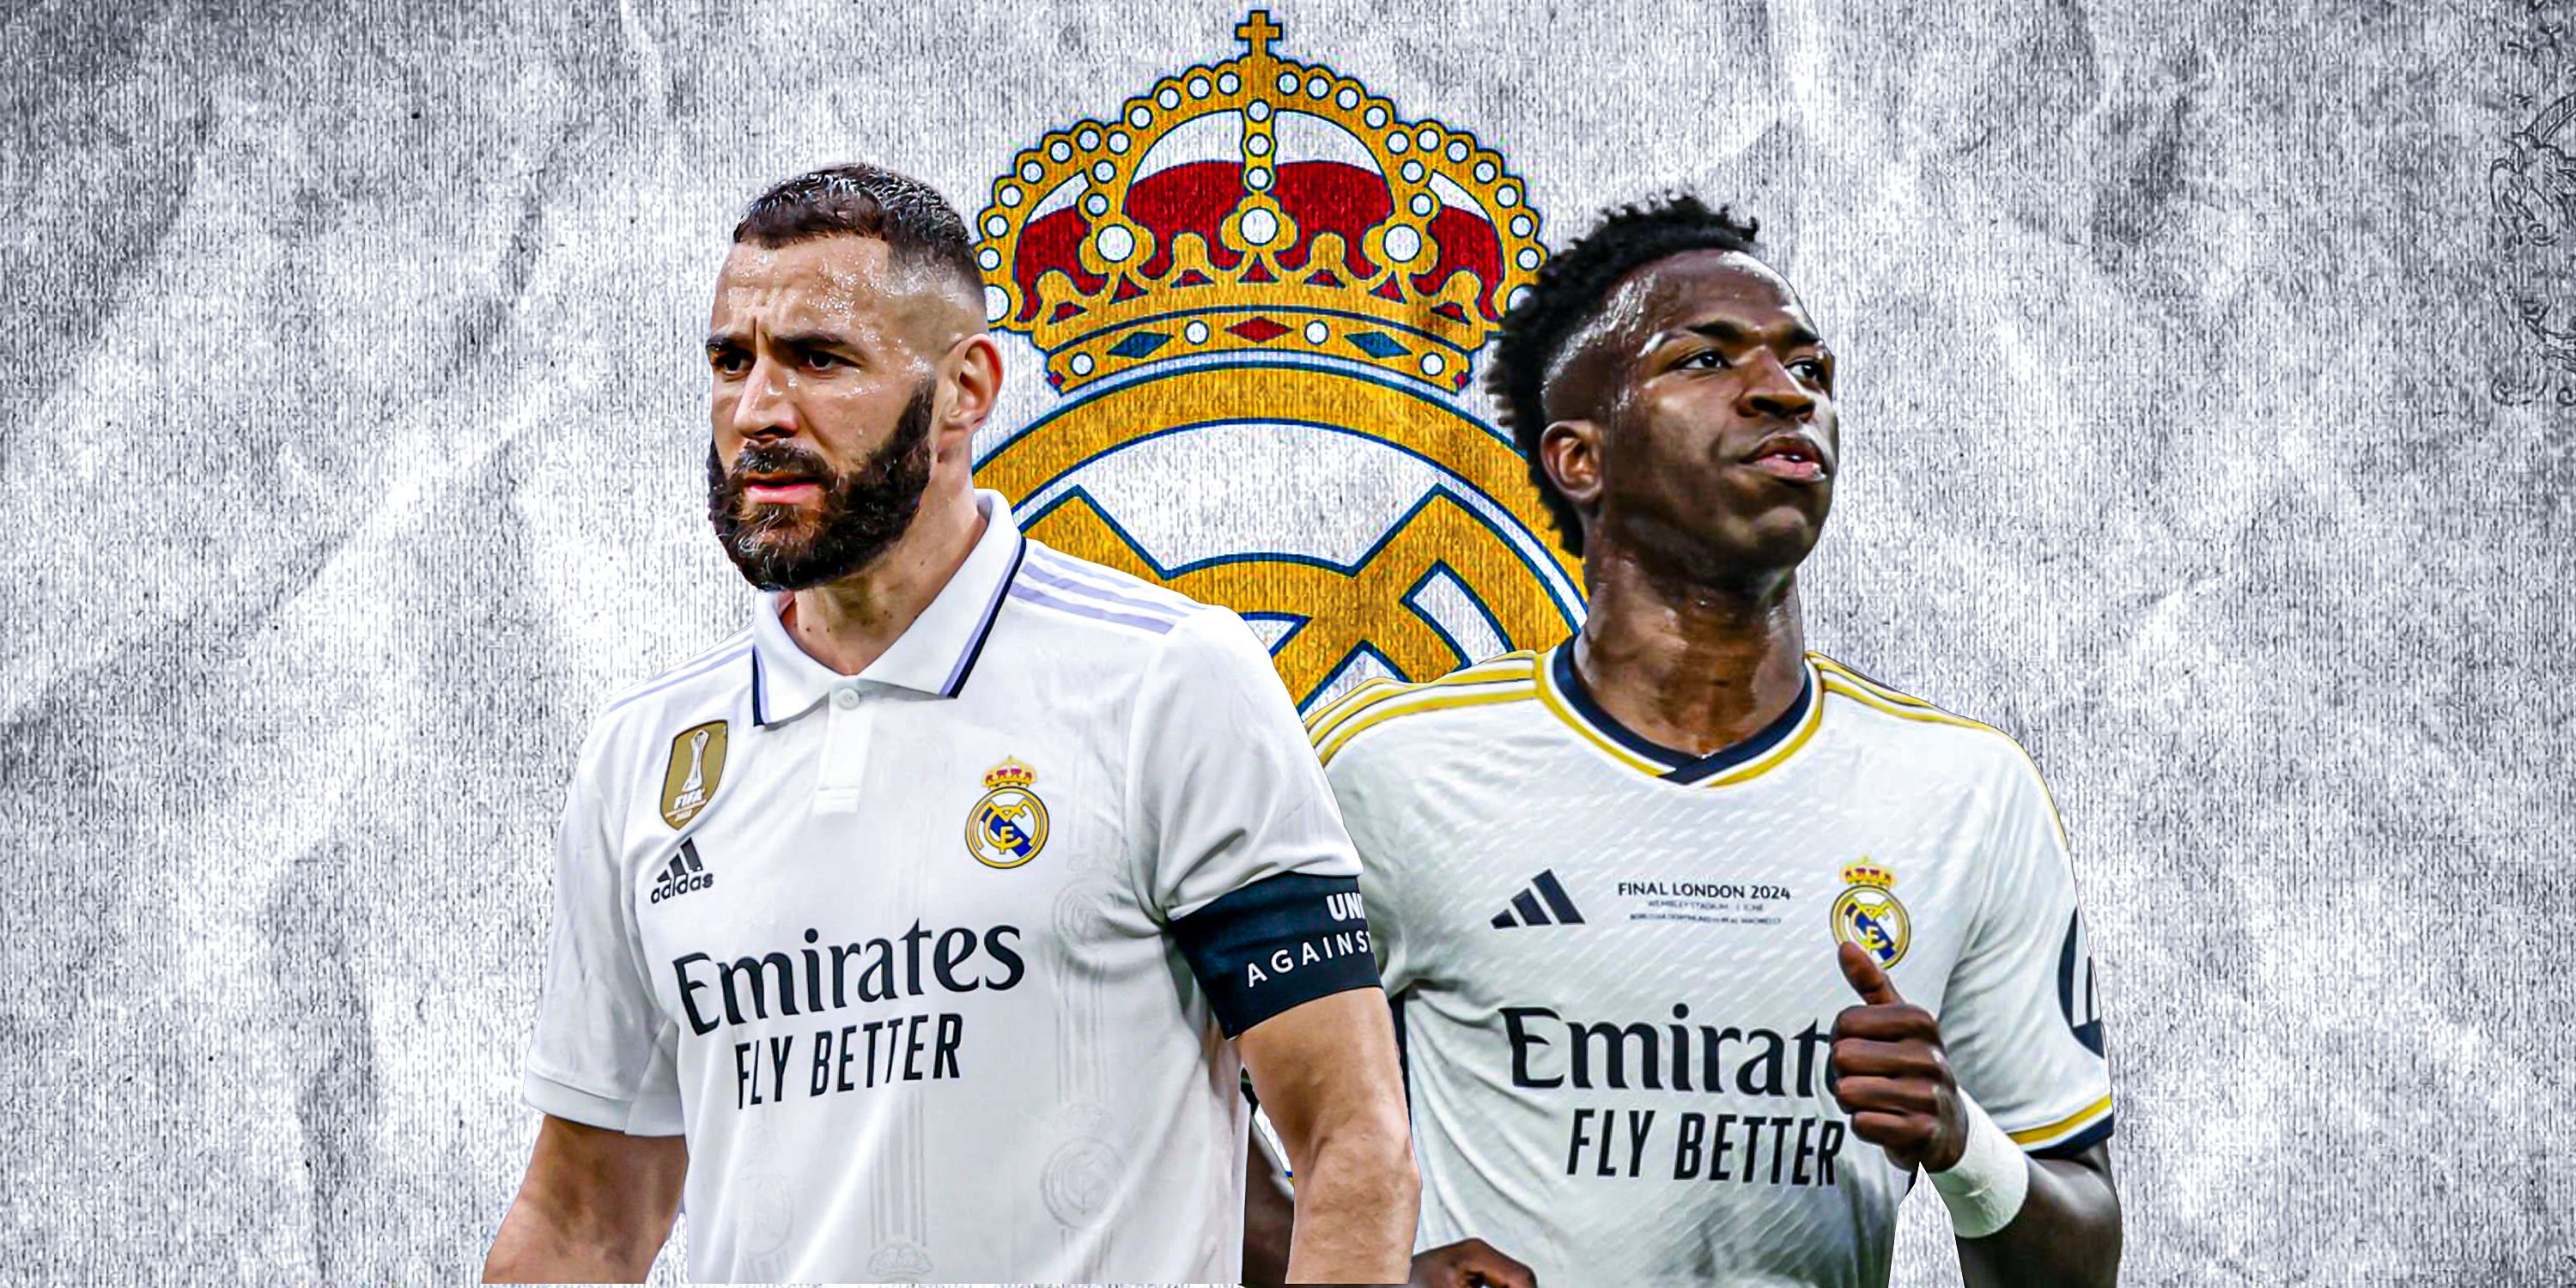 Karim Benzema and Vinicius Jr in Real Madrid kit looking angry/sad with Real Madrid logo